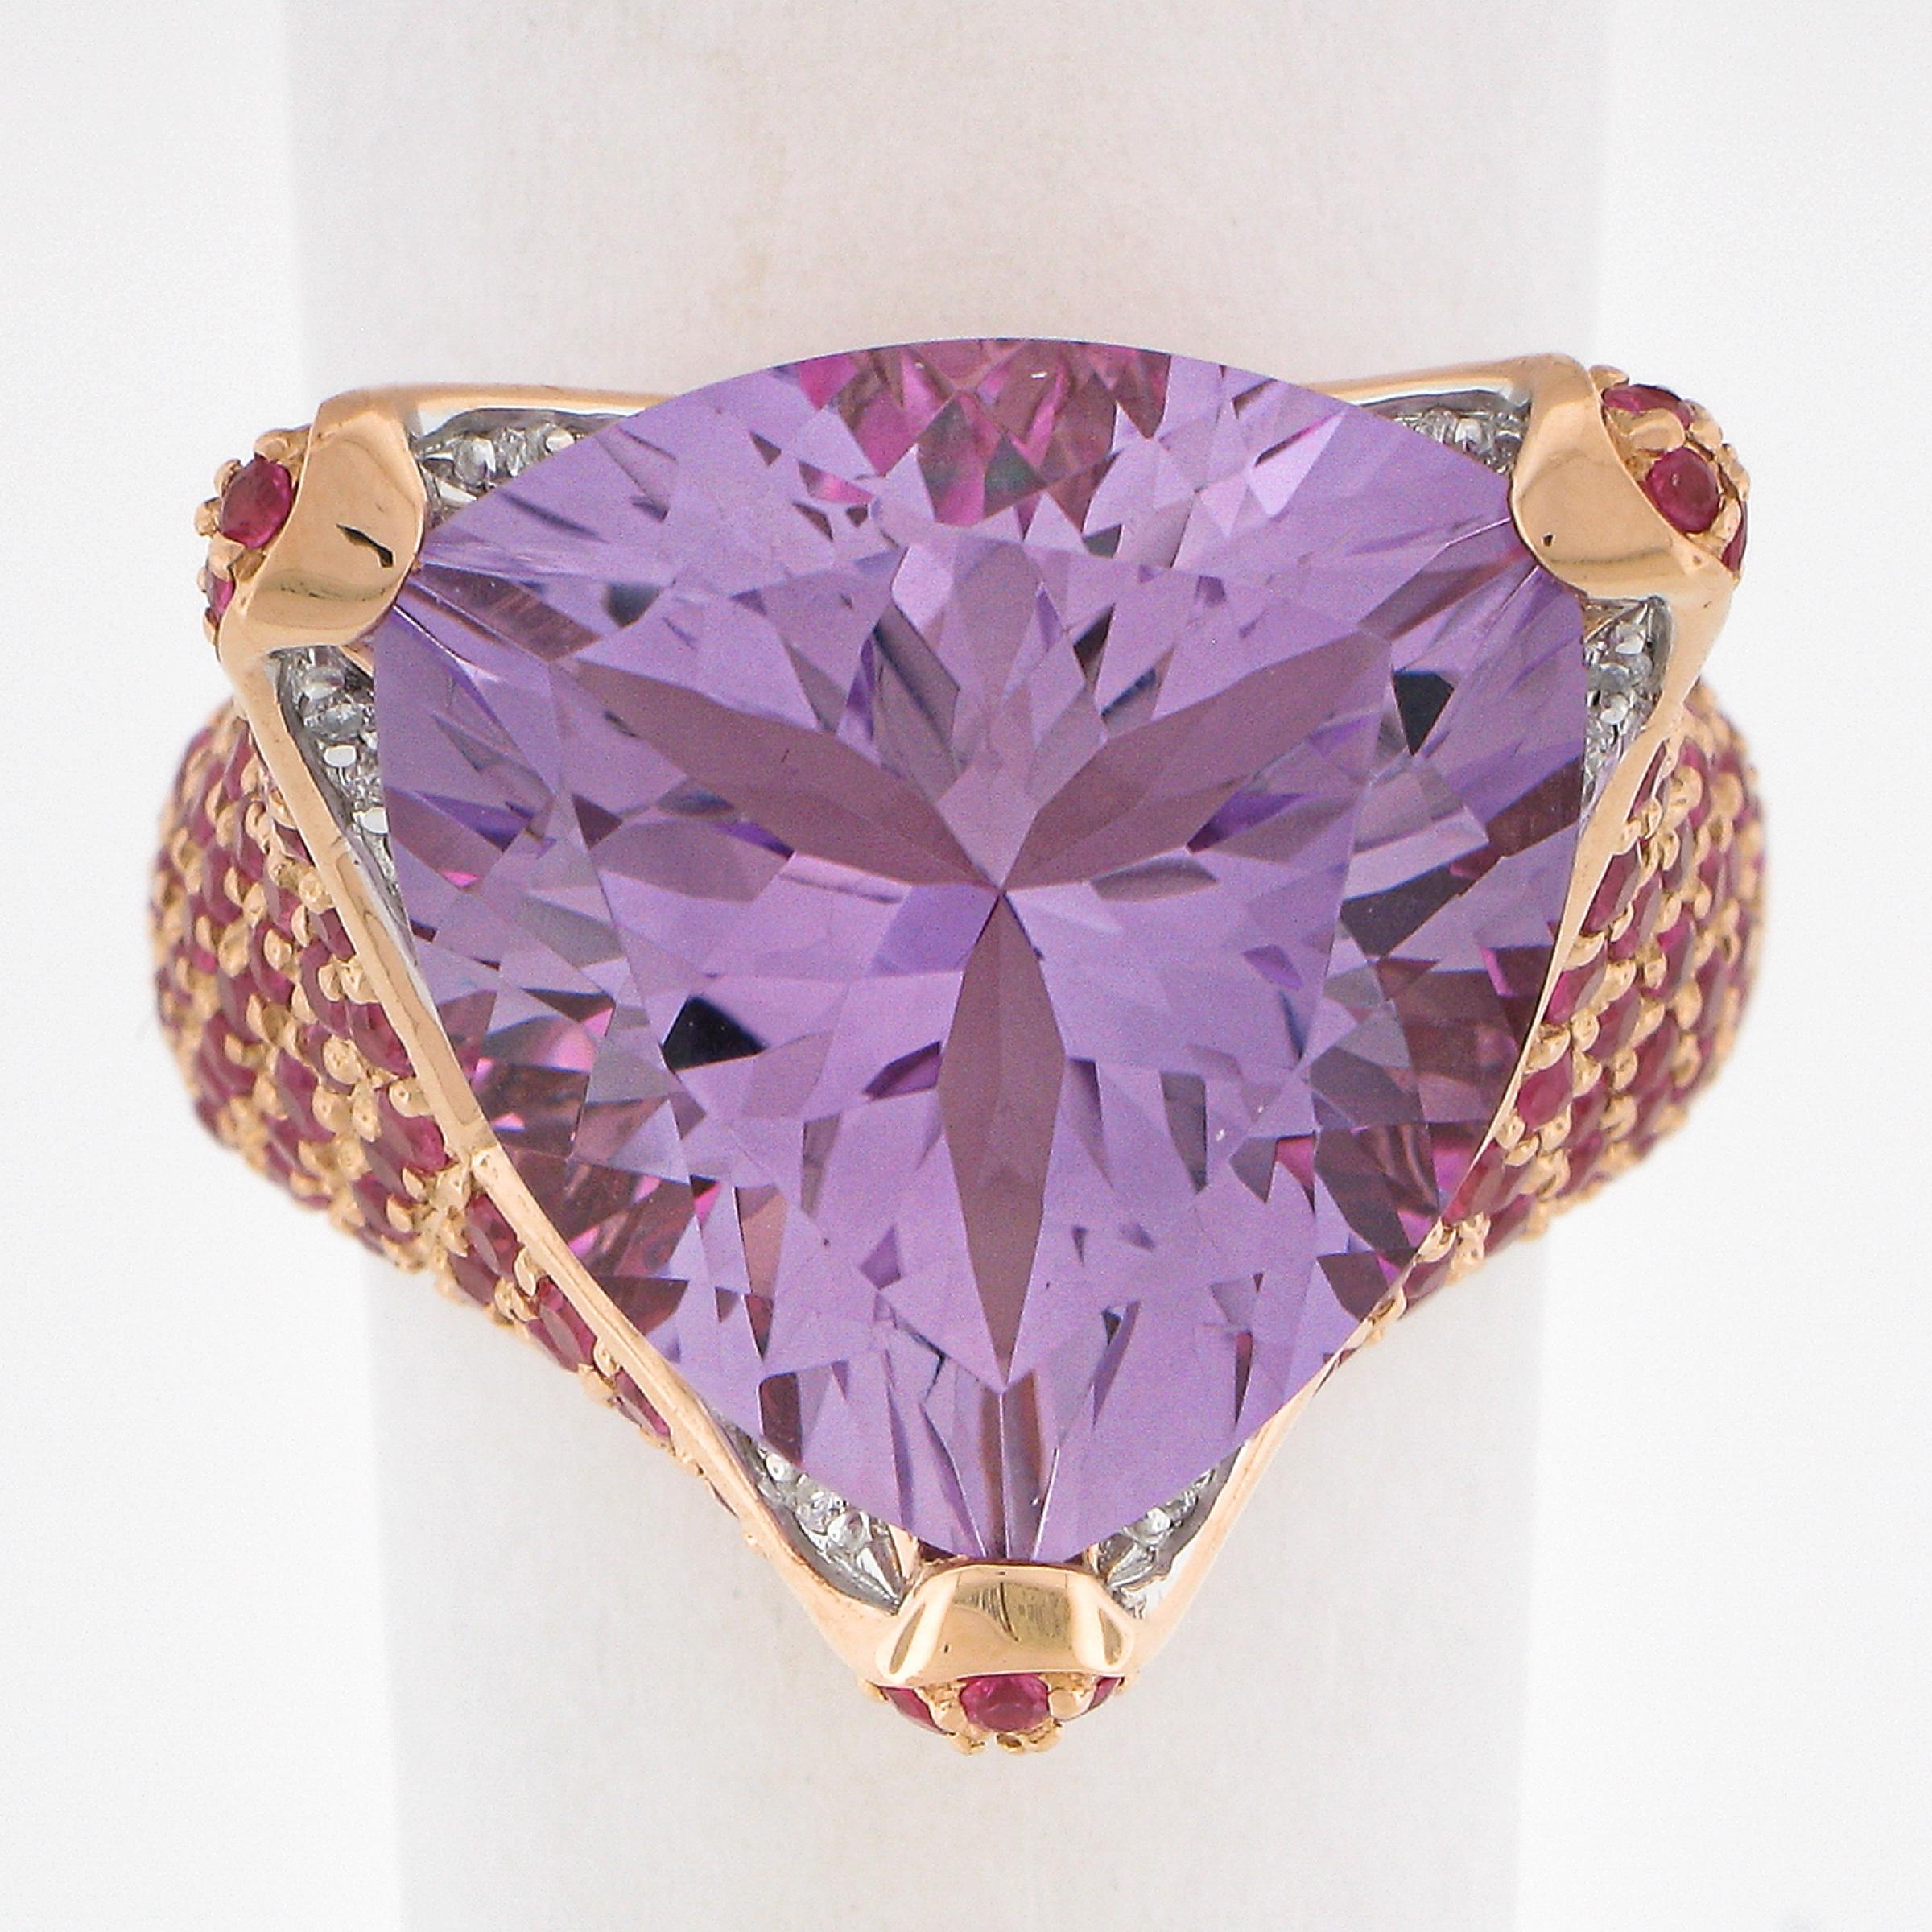 --Stone(s):--
(1) Natural Genuine Amethyst - Trillion Cut - Prong Set - Light- Medium Purple Color - 16mm (approx.)
(30) Natural Genuine Diamonds - Round Brilliant Cut - Pave Set - SI1-I2 Clarity - G-I Color - 0.25ctw (approx.)
Numerous Natural